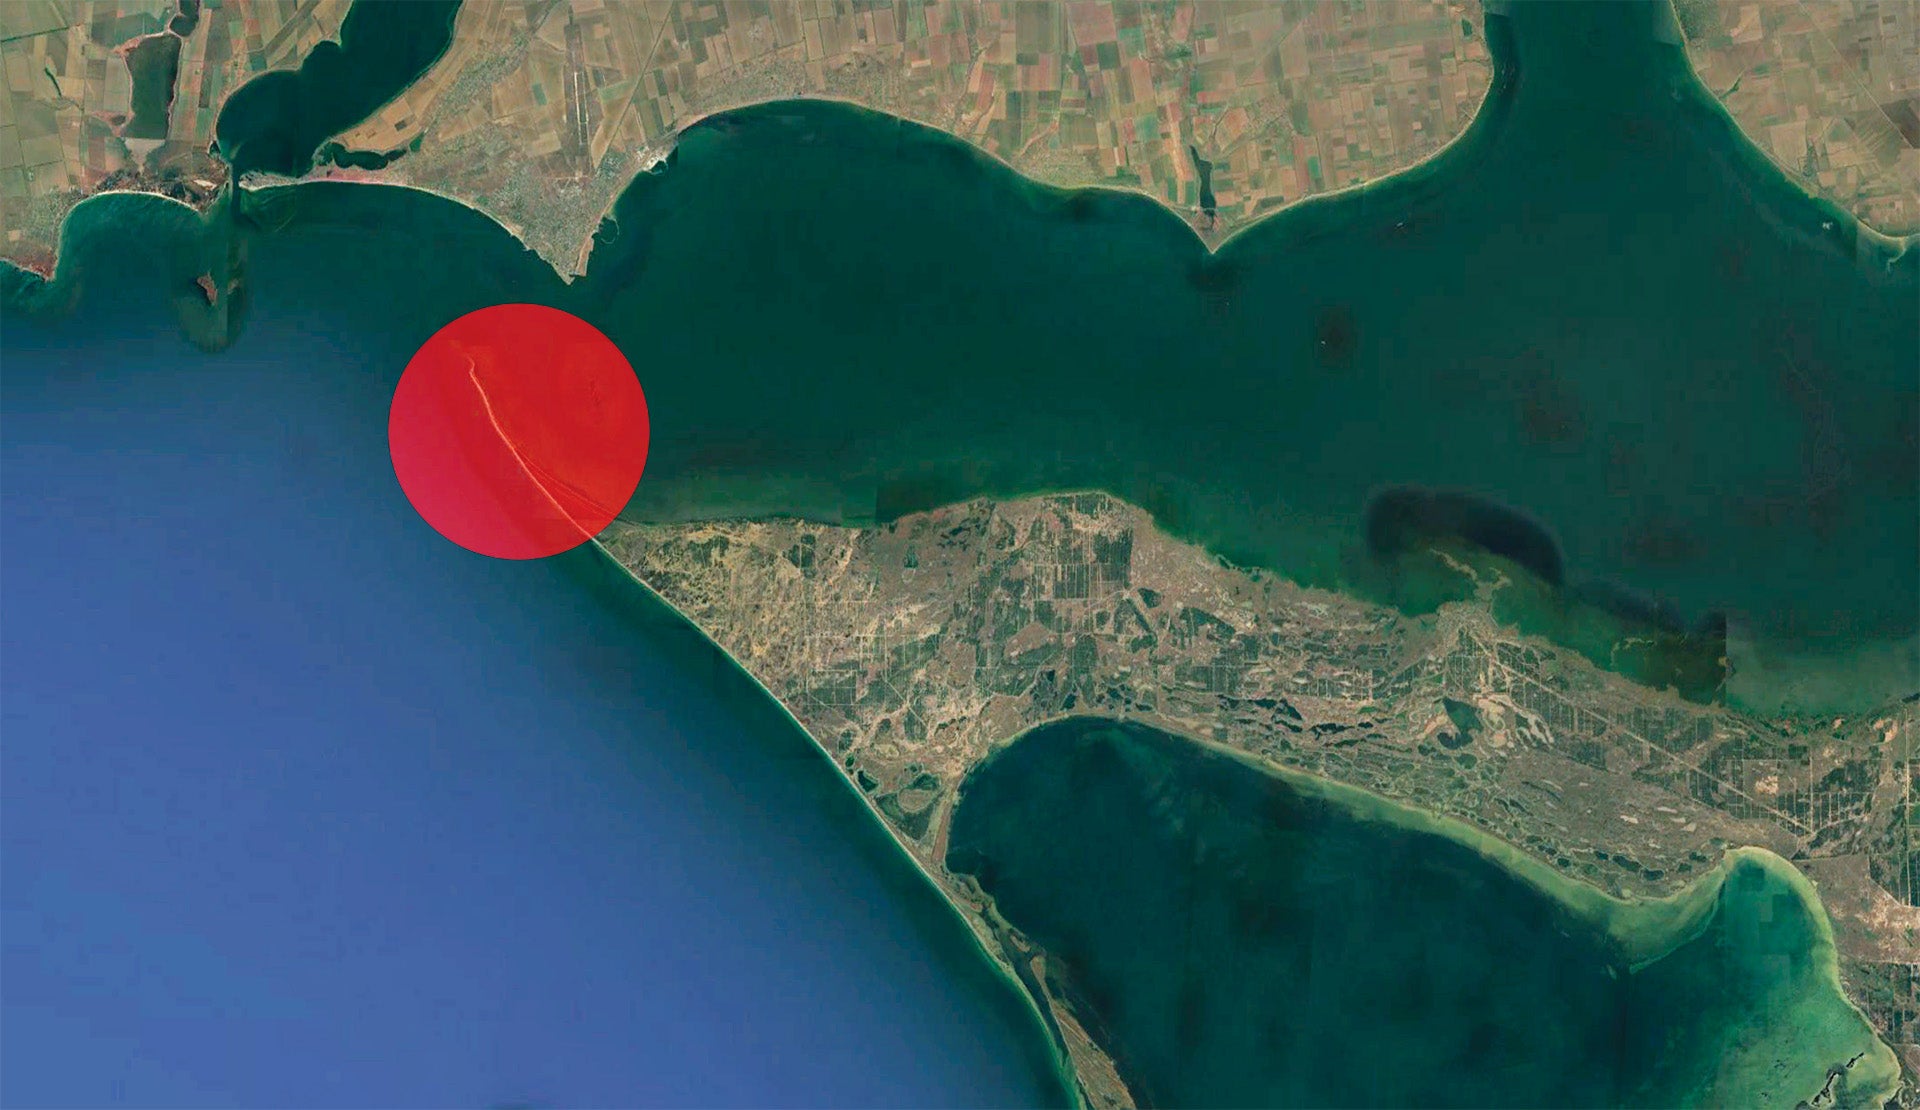 Google Earth image shows the Battle For Kinburn Spit could be Underway in Ukraine